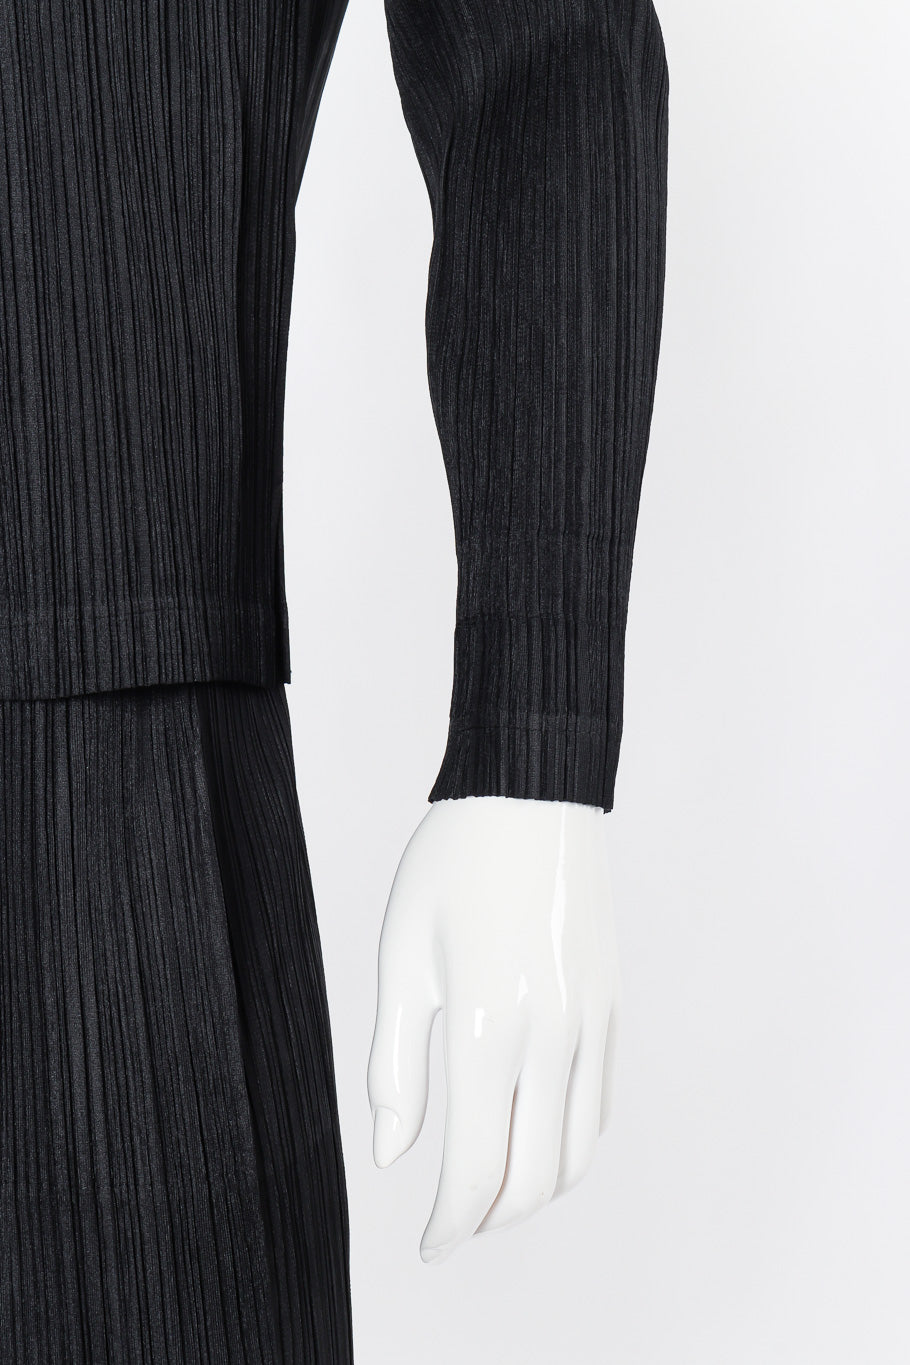 Pleated skirt, top, and jacket set by Issey Miyake on mannequin sleeve close @recessla